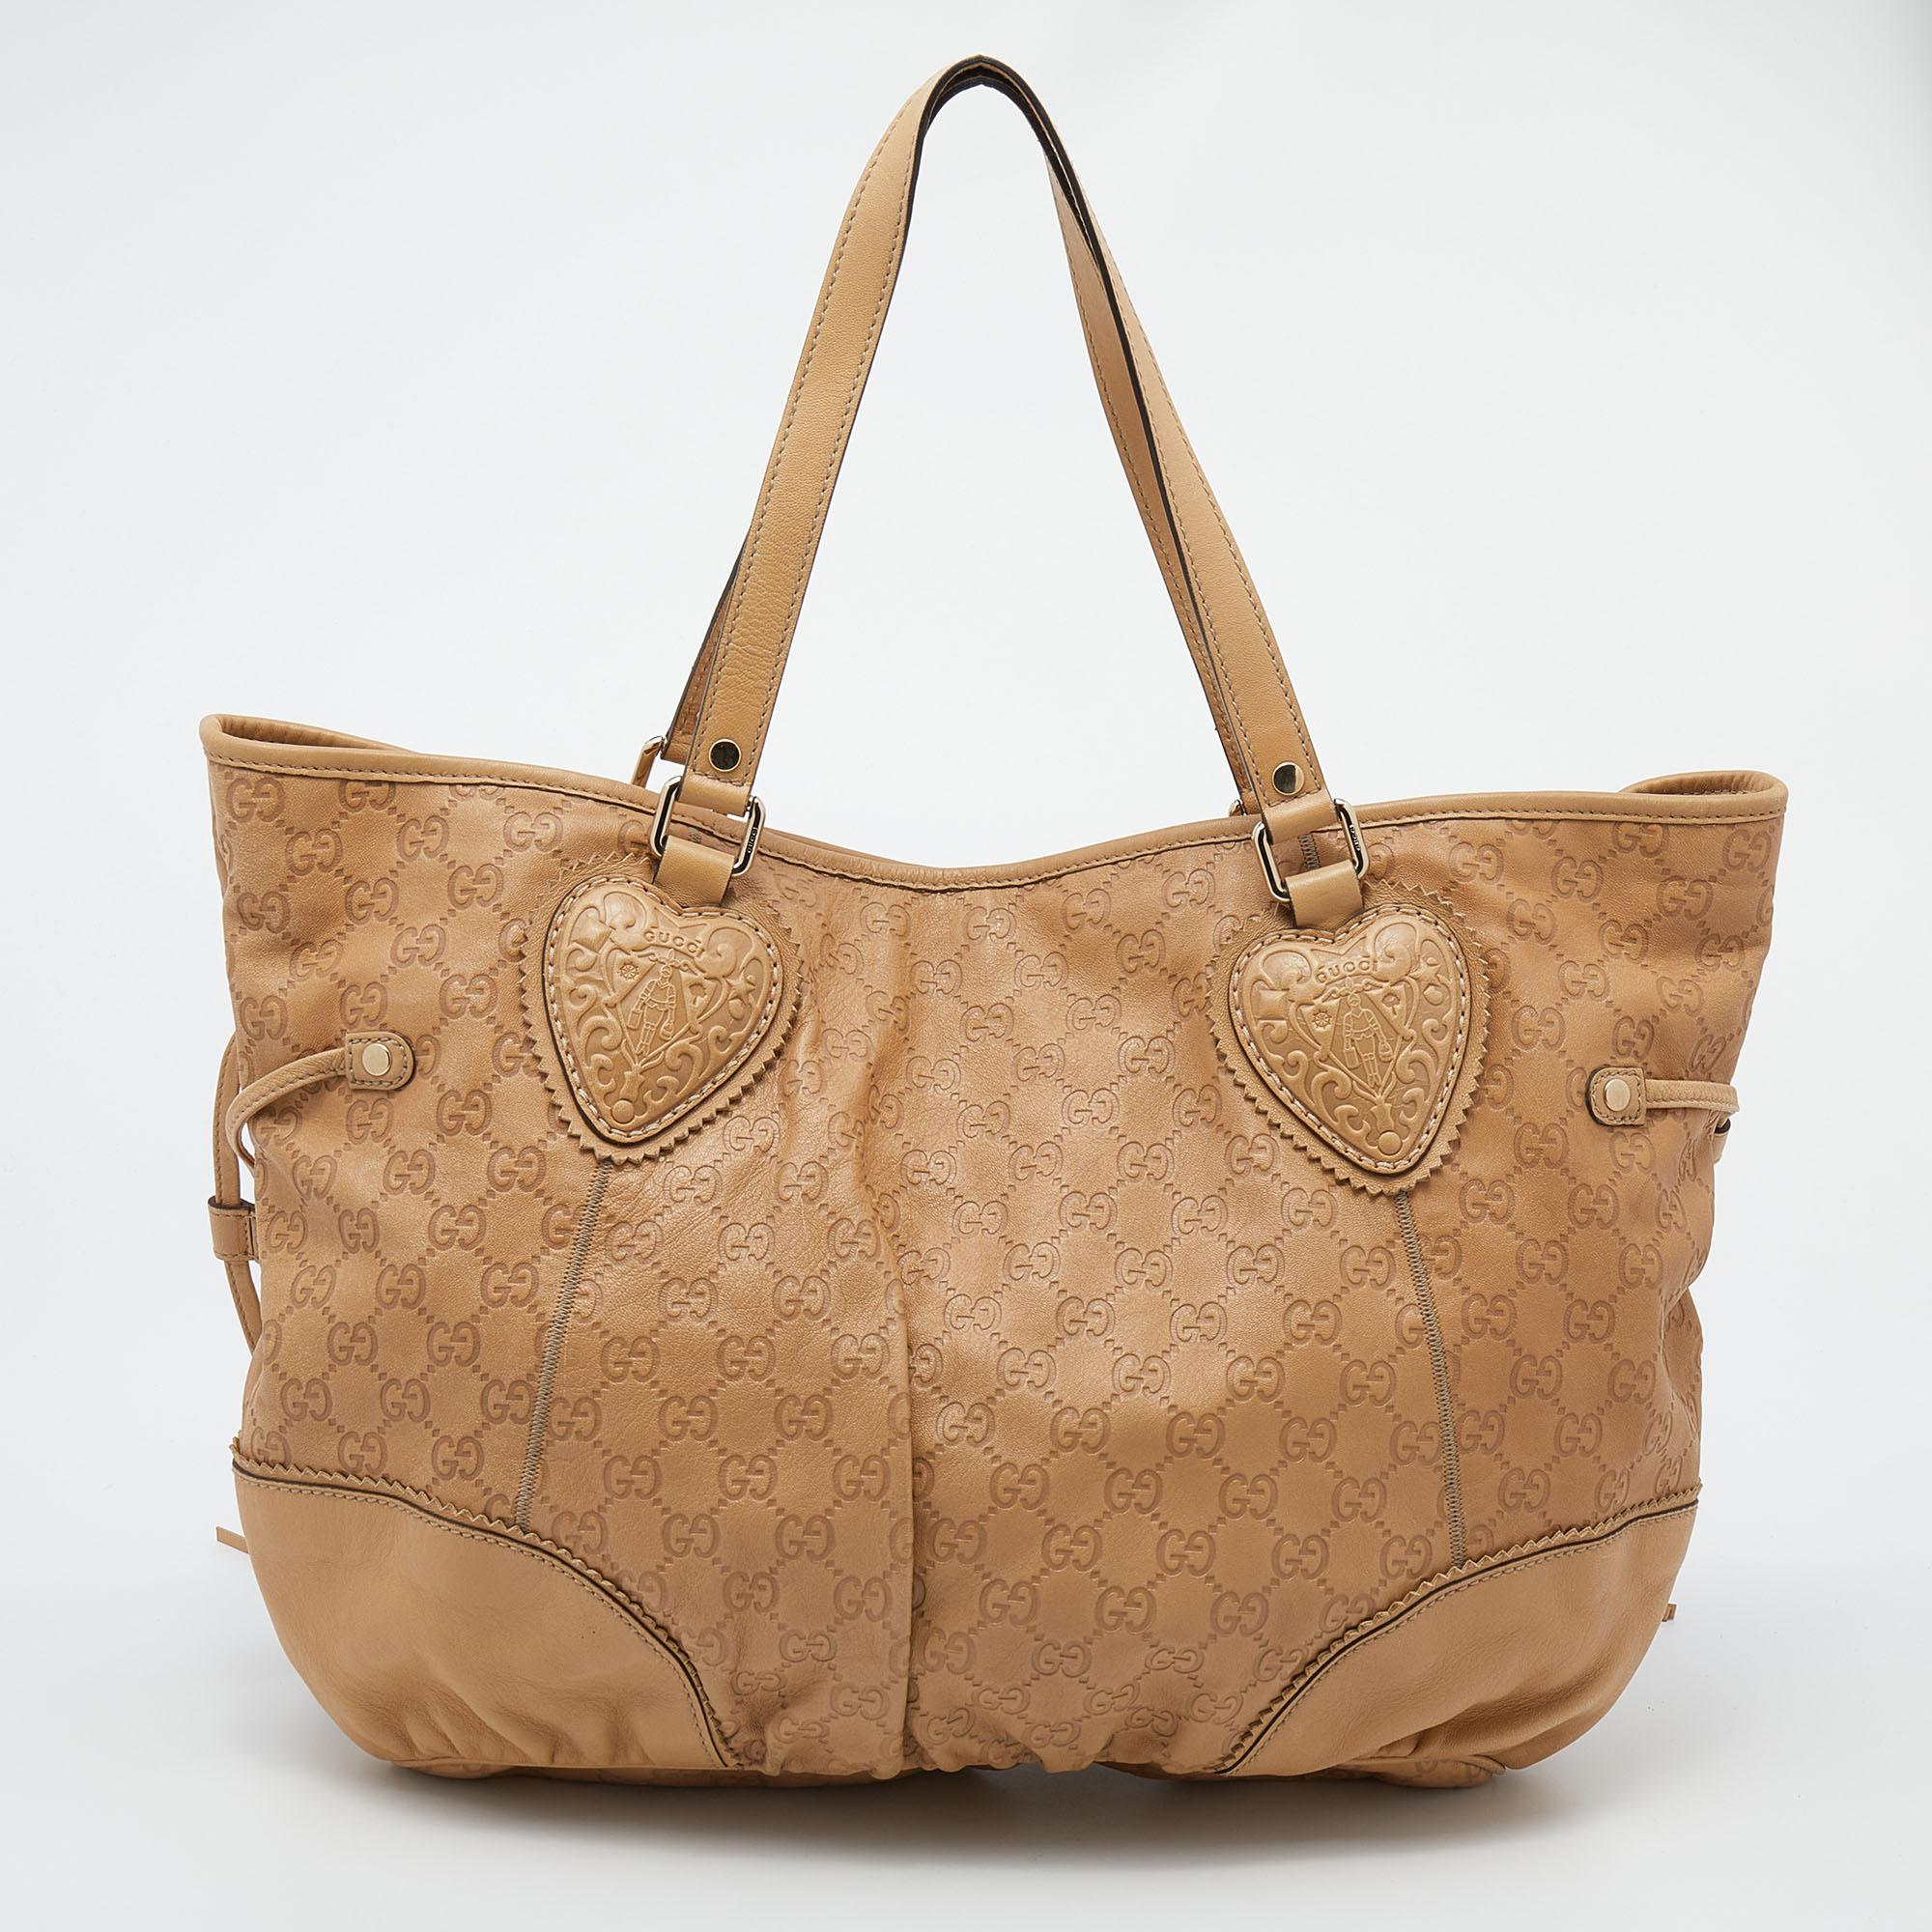 Great for everyday use, this Tribeca tote by Gucci is a wardrobe must! It is crafted from beige Guccissima leather trims. The everyday look is complete with heart pattern crests, fashionable side tassels, short leather handles, and gold-tone